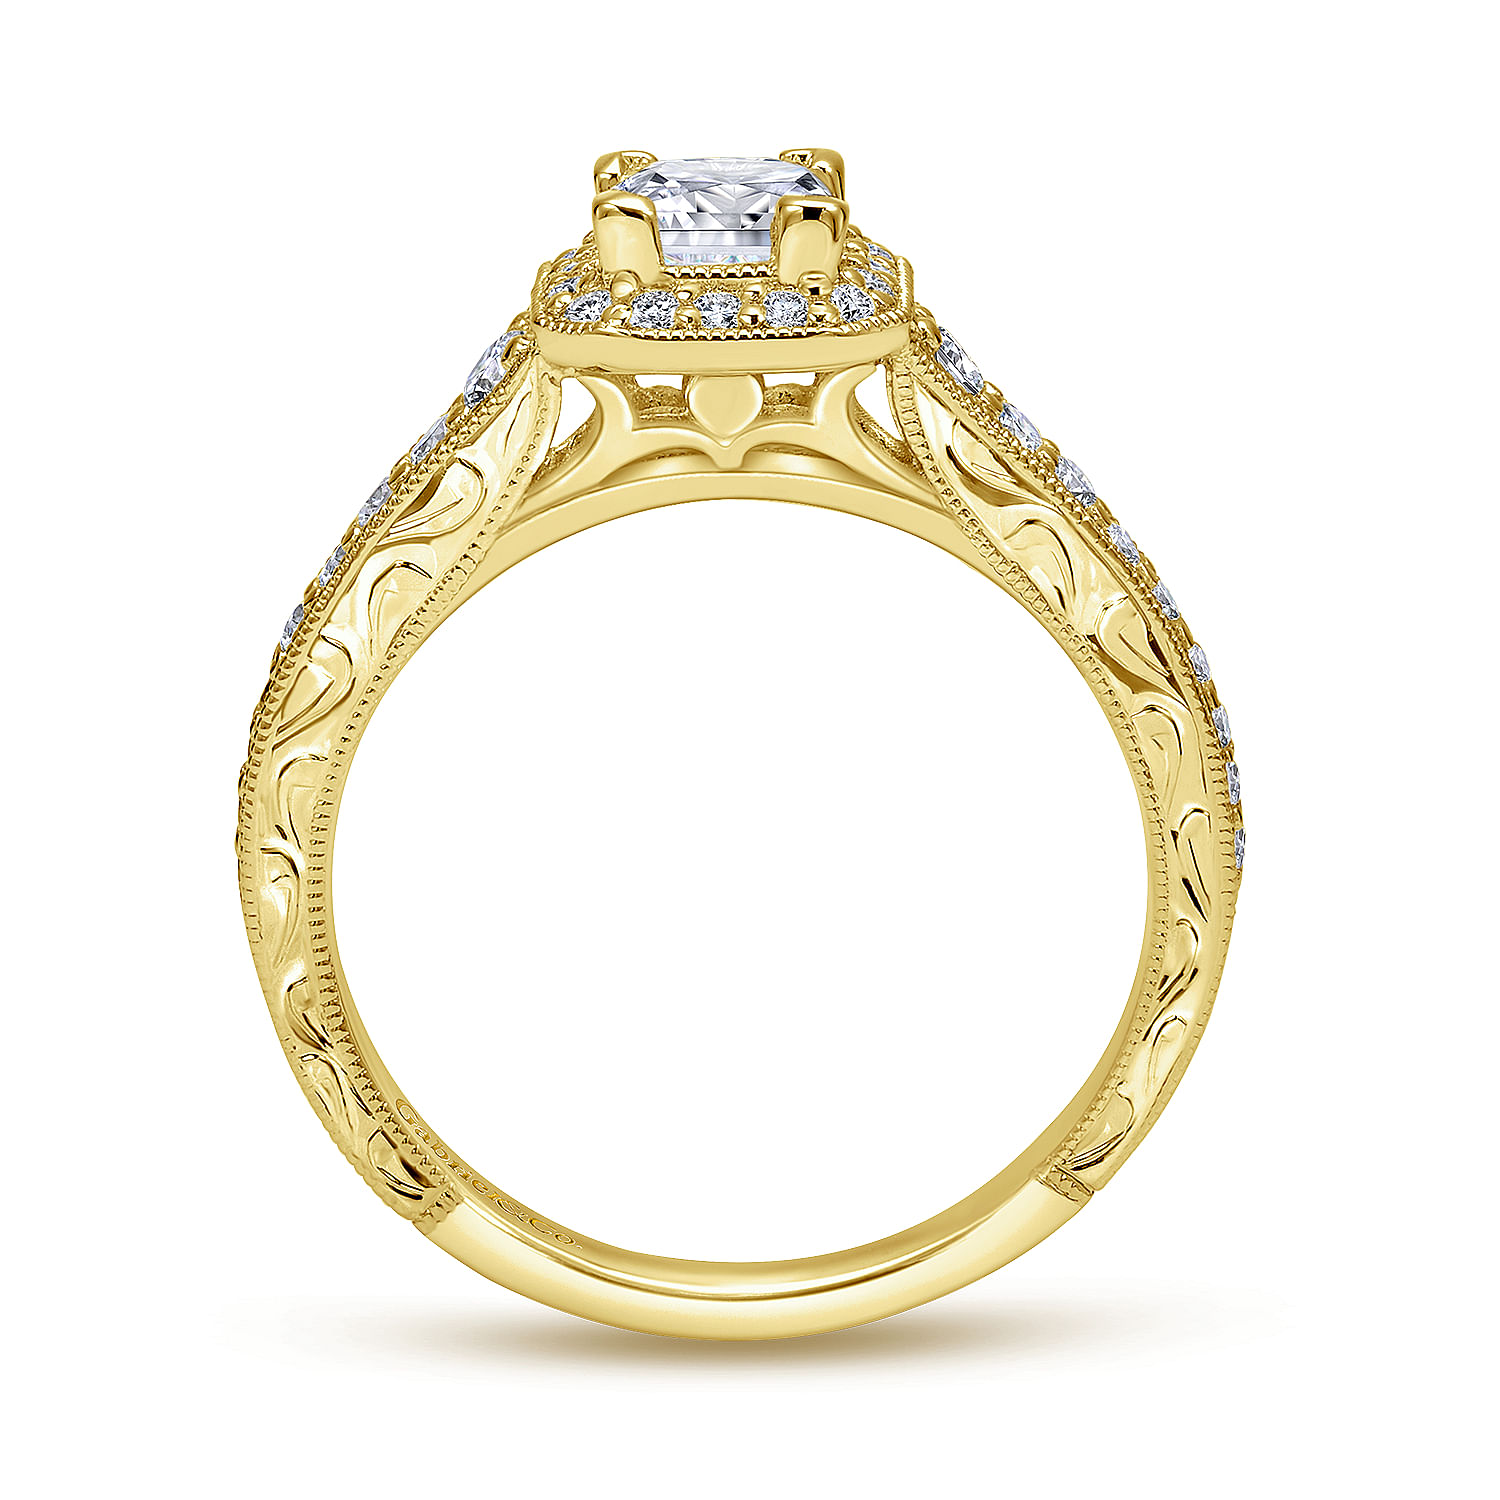 Vintage Inspired 14K Yellow Gold Princess Halo Complete Diamond Engagement Ring